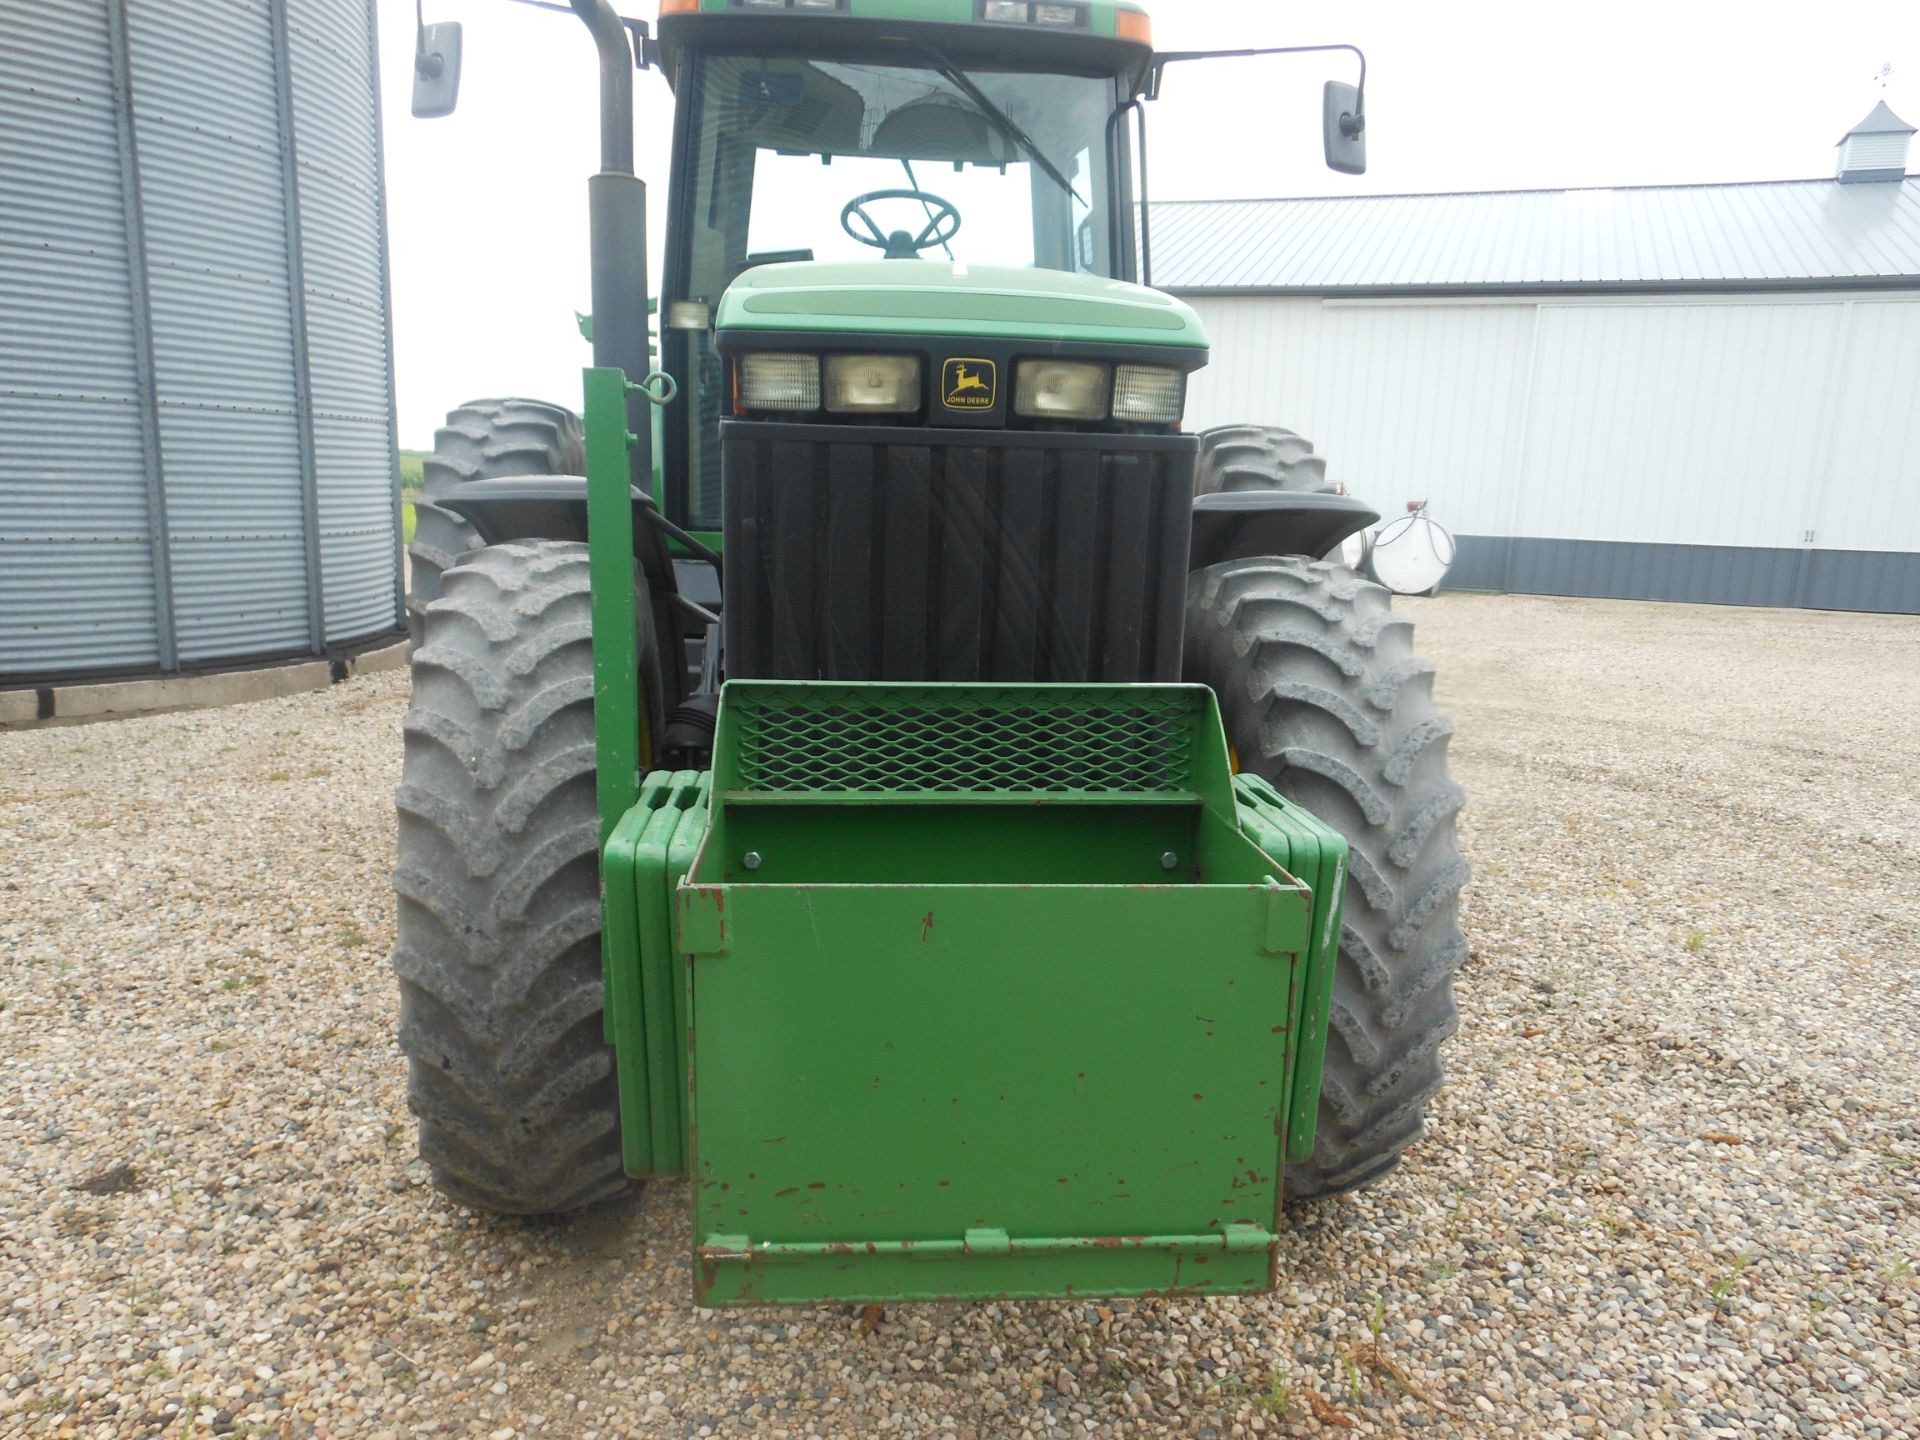 1997 8300 JD MFWD, 18.4 R46 10 bolt duals, 14.9-34 fronts, quick coupler, Big 1000 PTO, 6 front - Image 2 of 3